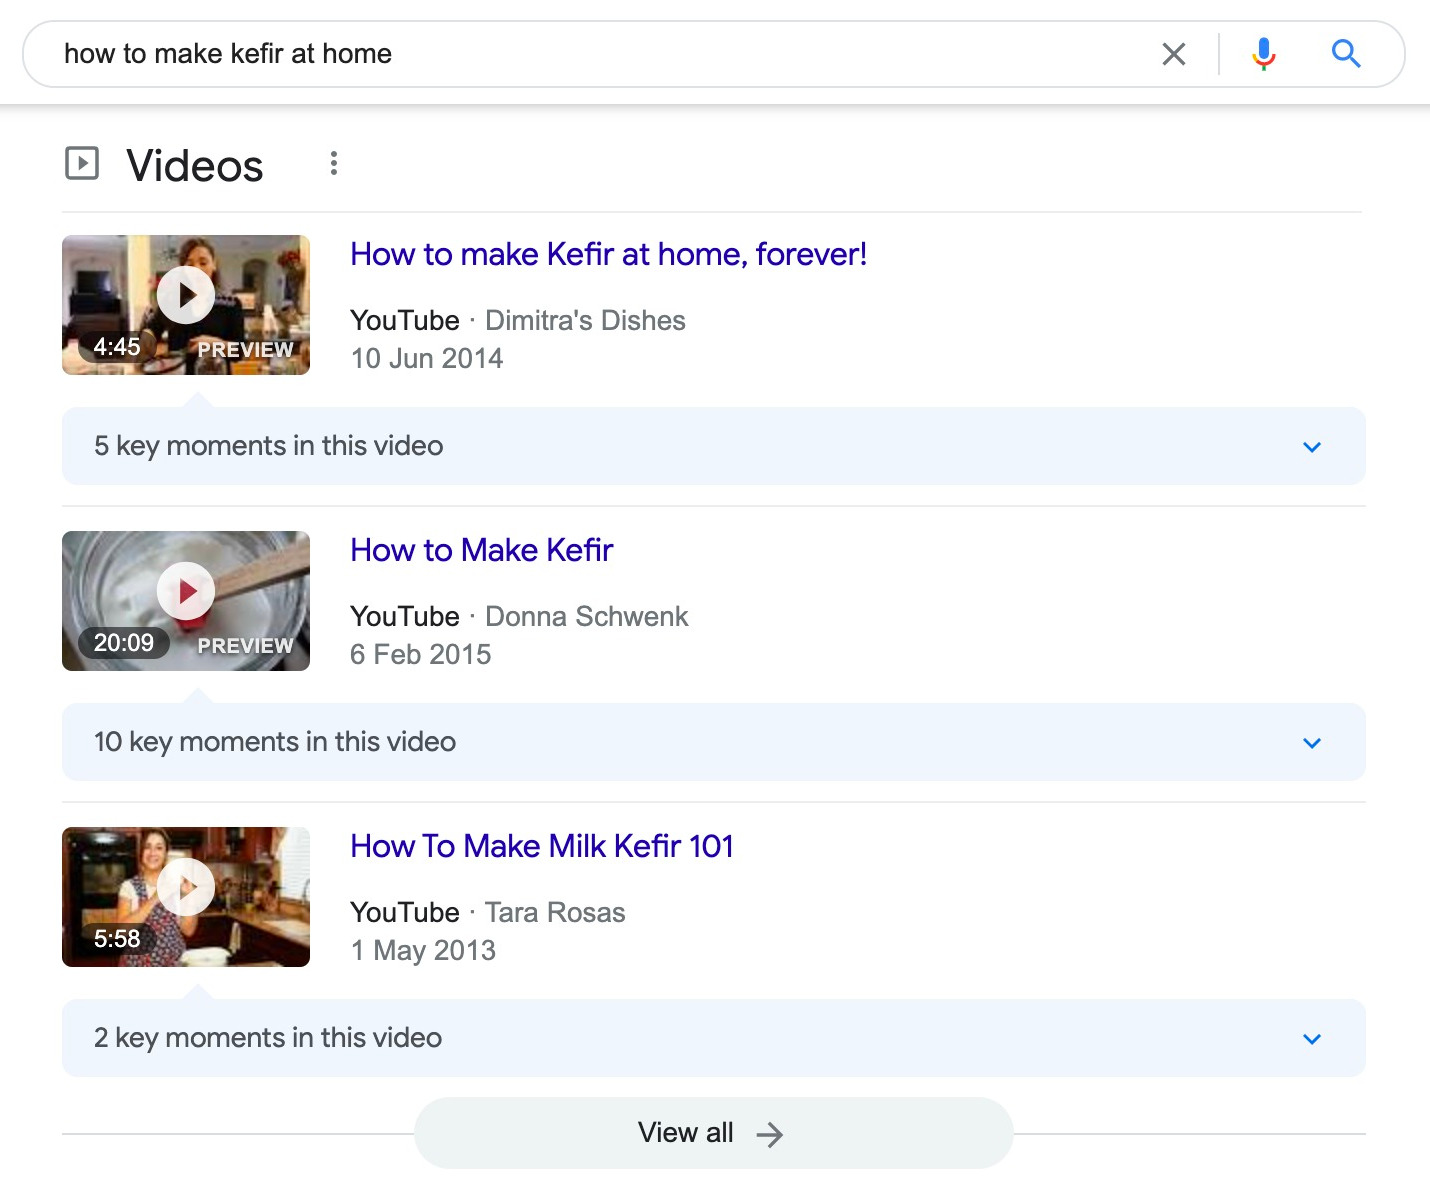 The Video SERP results for the query "how to make kefir at home"